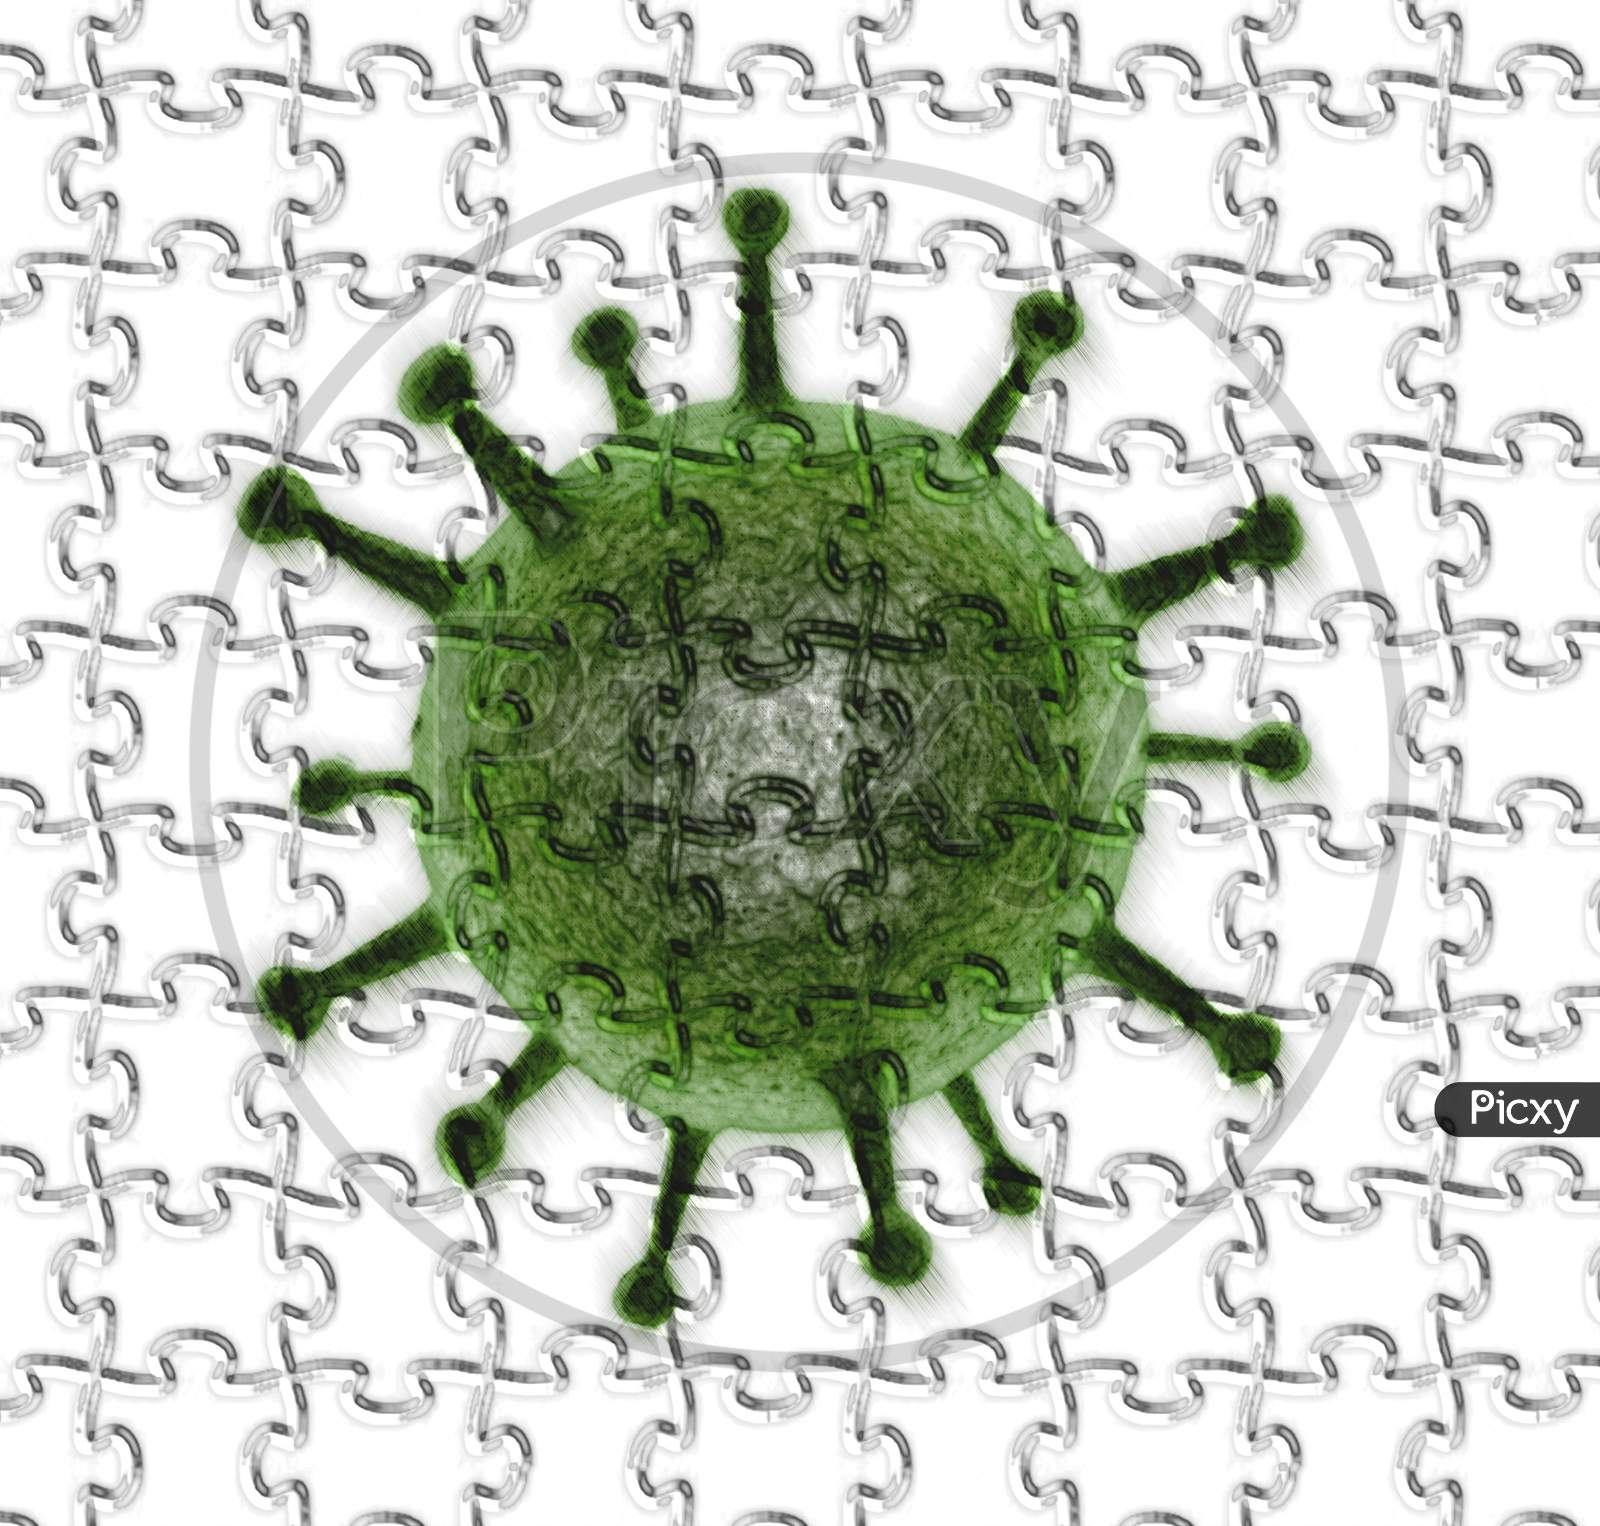 Illustration of a corona virus with sketch effects